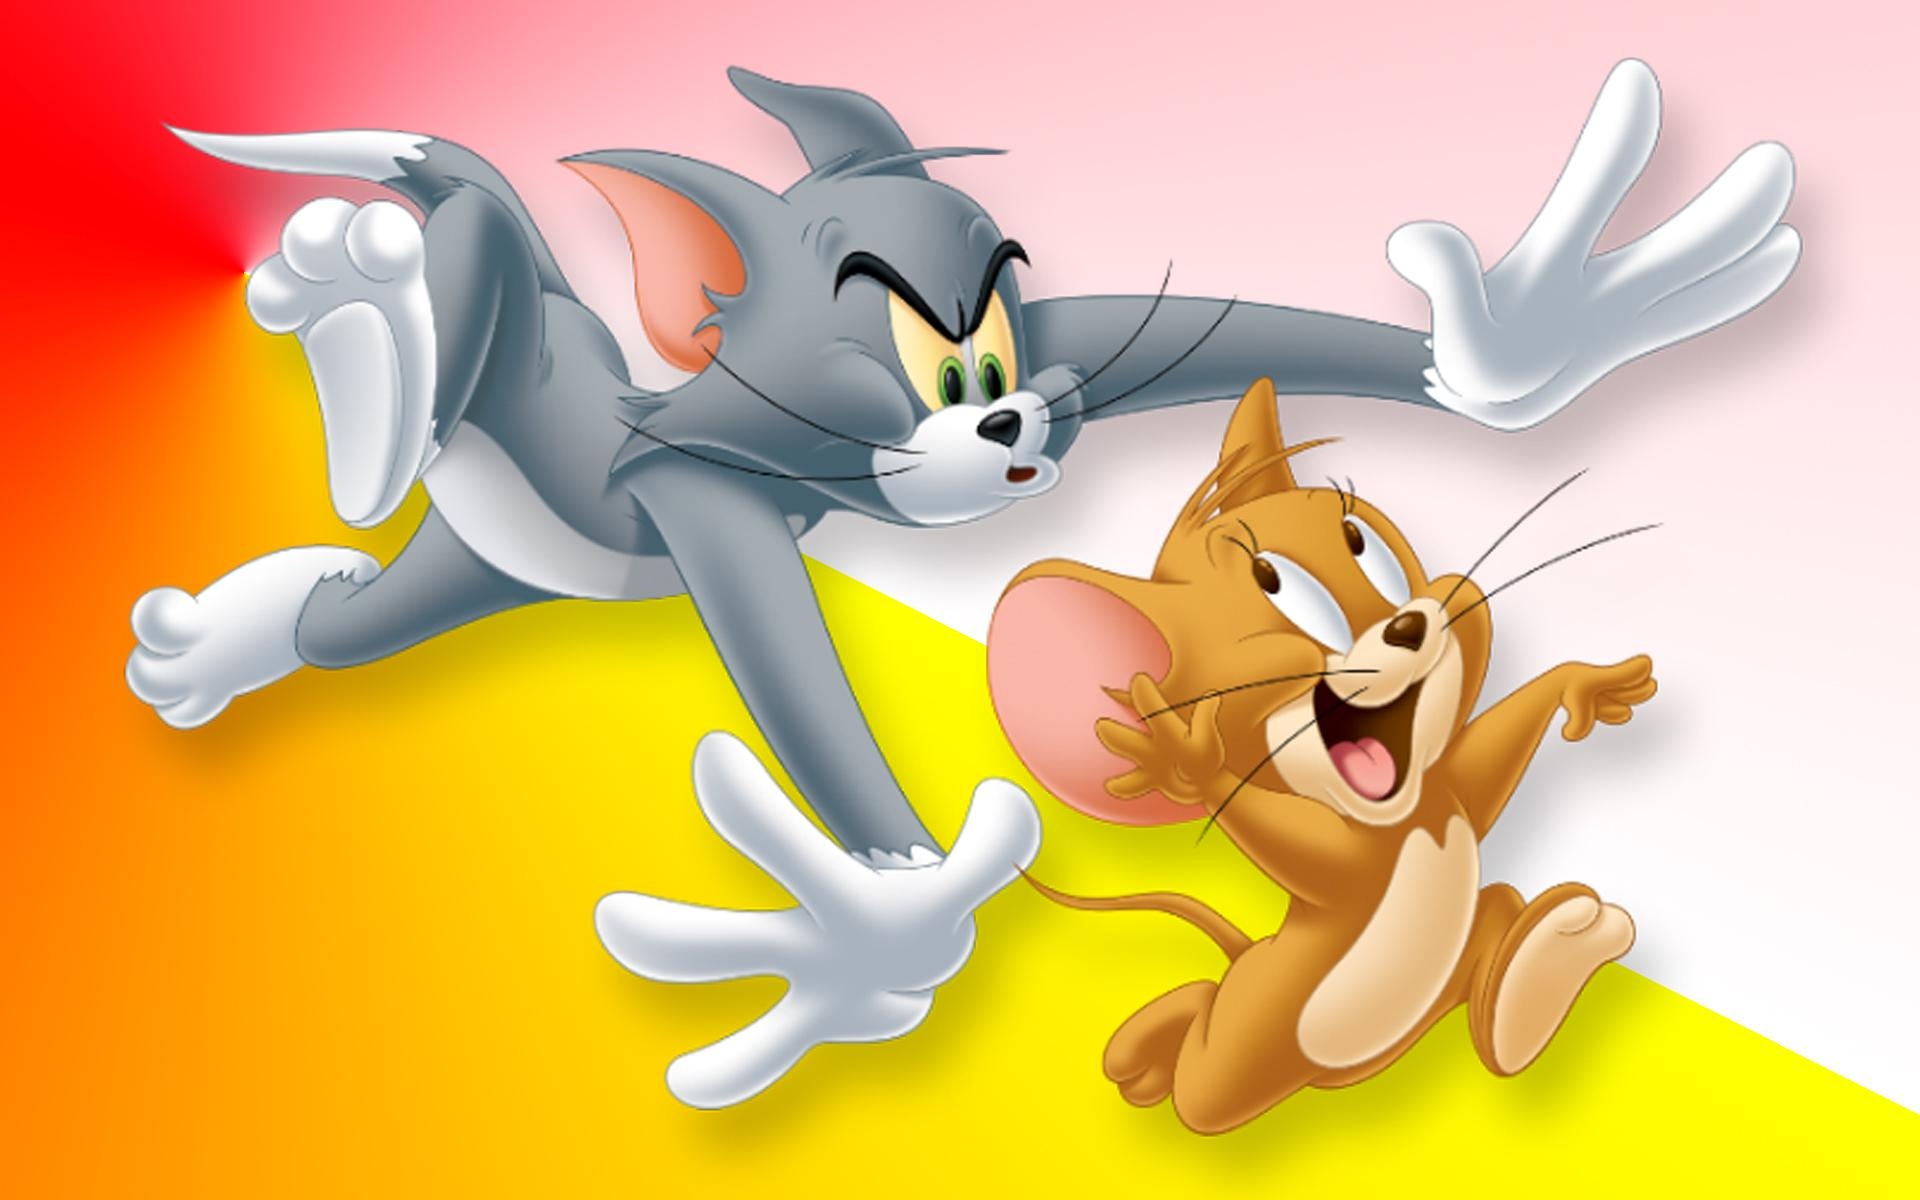 Tom and Jerry wallpaper, Cartoon favorites, Cherished characters, Quirky humor, 1920x1200 HD Desktop